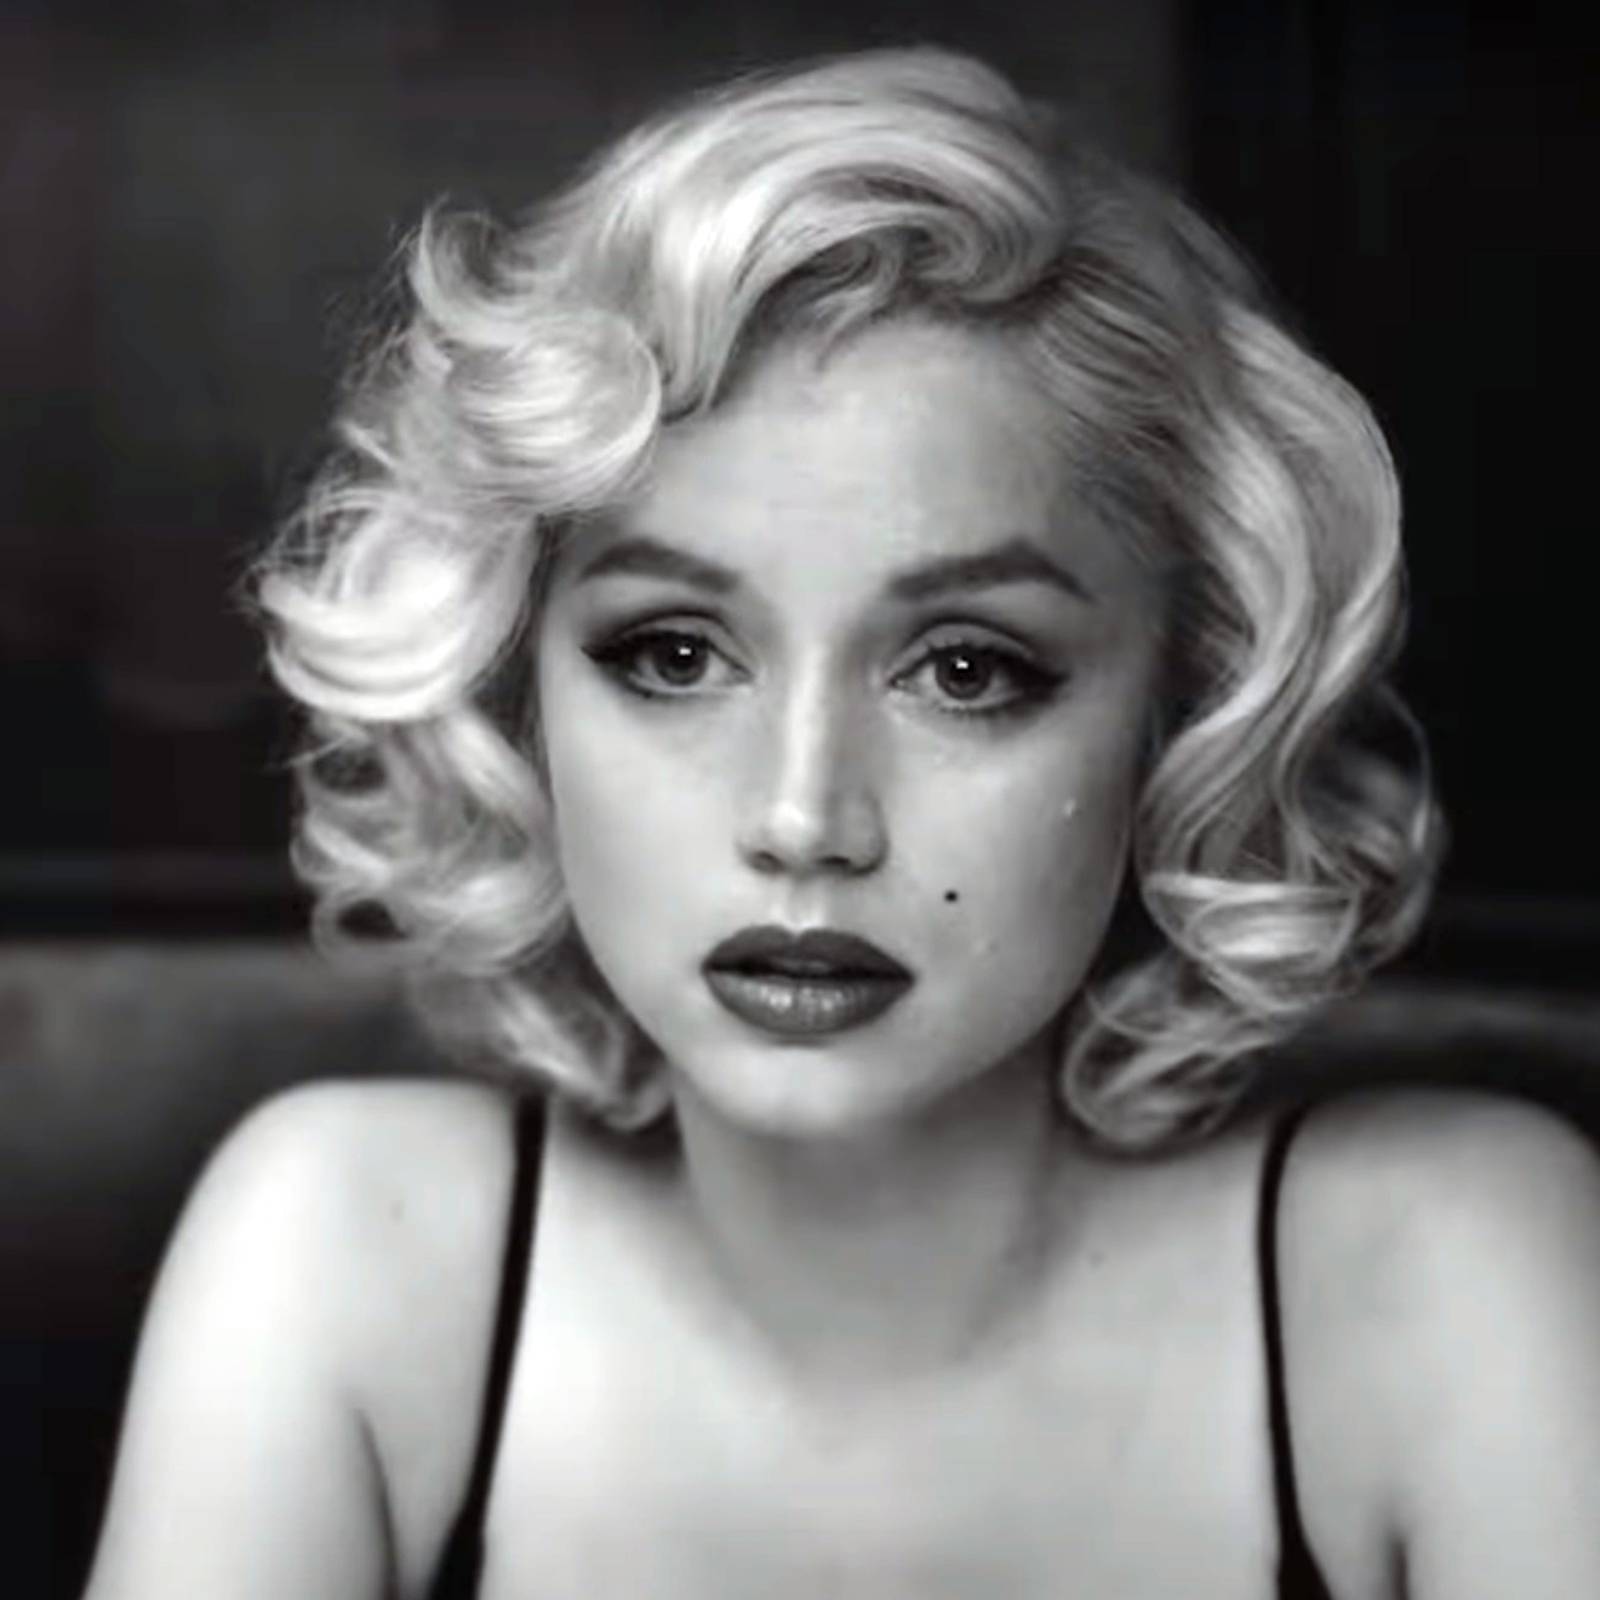 Blonde': still exploiting Marilyn Monroe 60 years after her death – The  Guilfordian, marilyn monroe